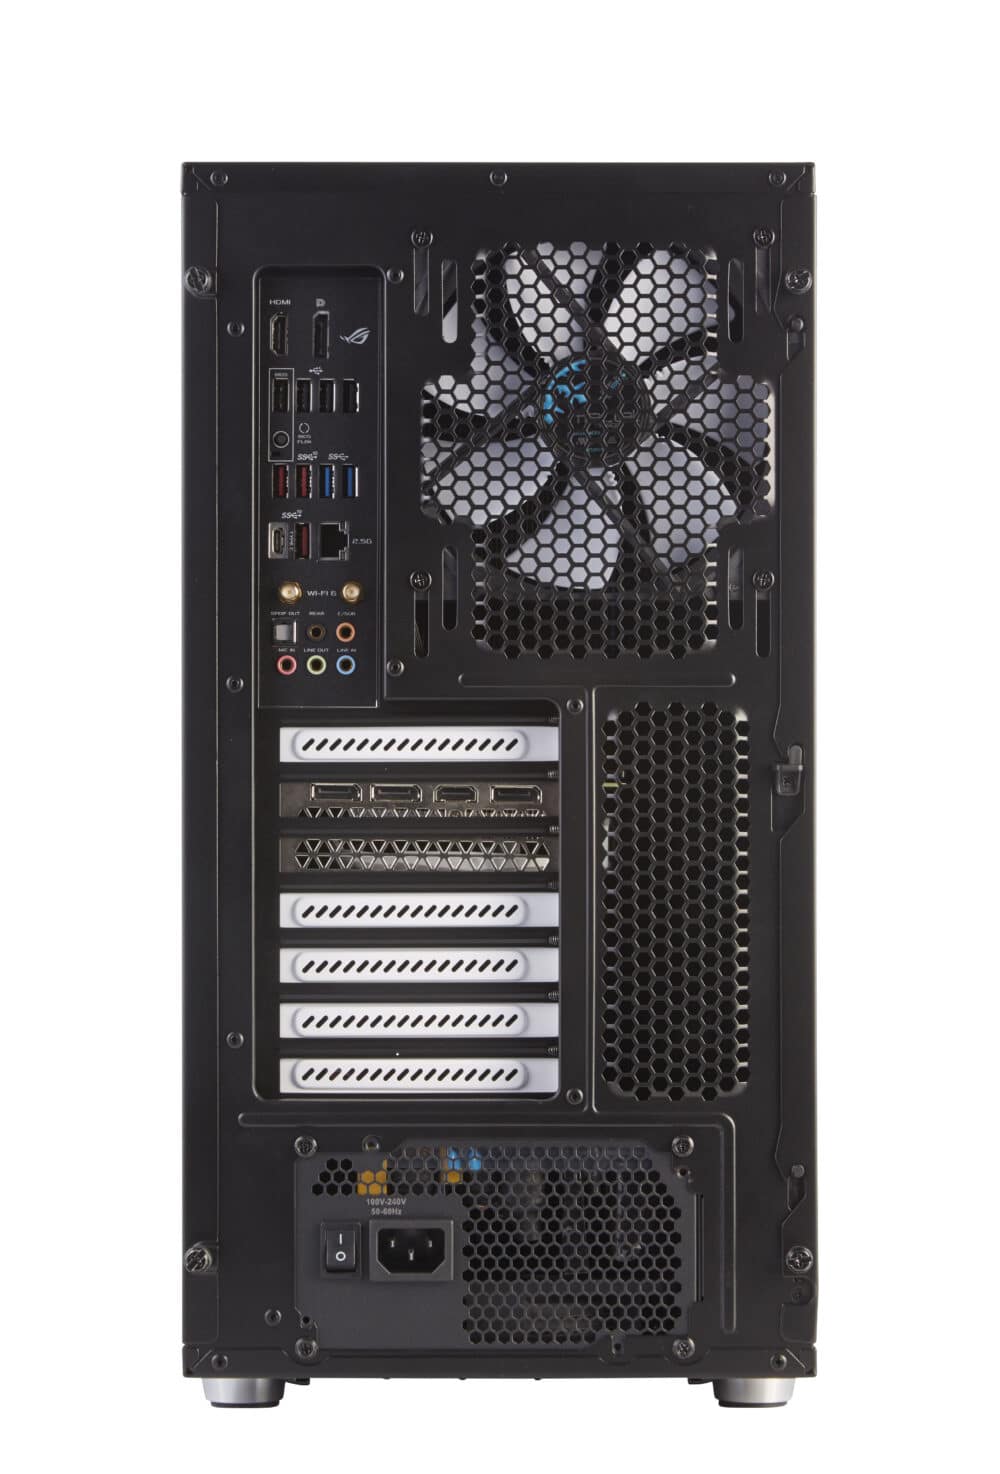 A black computer case with a fan on the side.